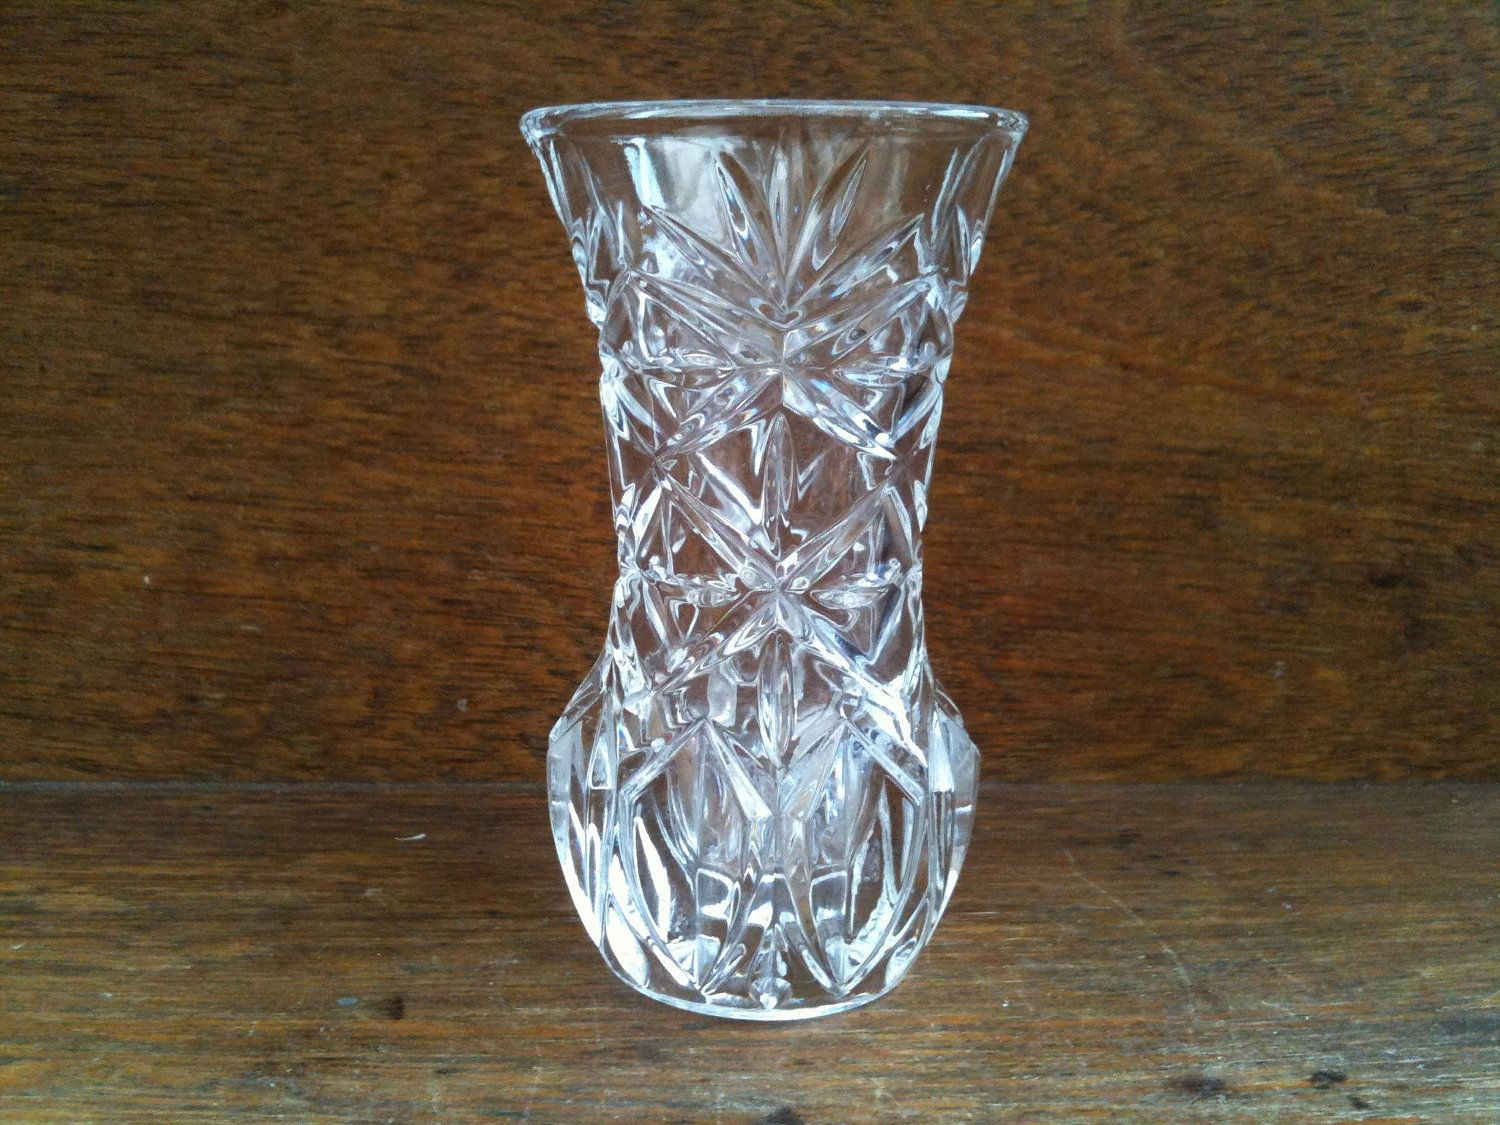 small clear glass bud vases of vintage english small bud lead crystal glass vase circa 1950s in vintage english small bud lead crystal glass vase circa 1950s purchase in store here http